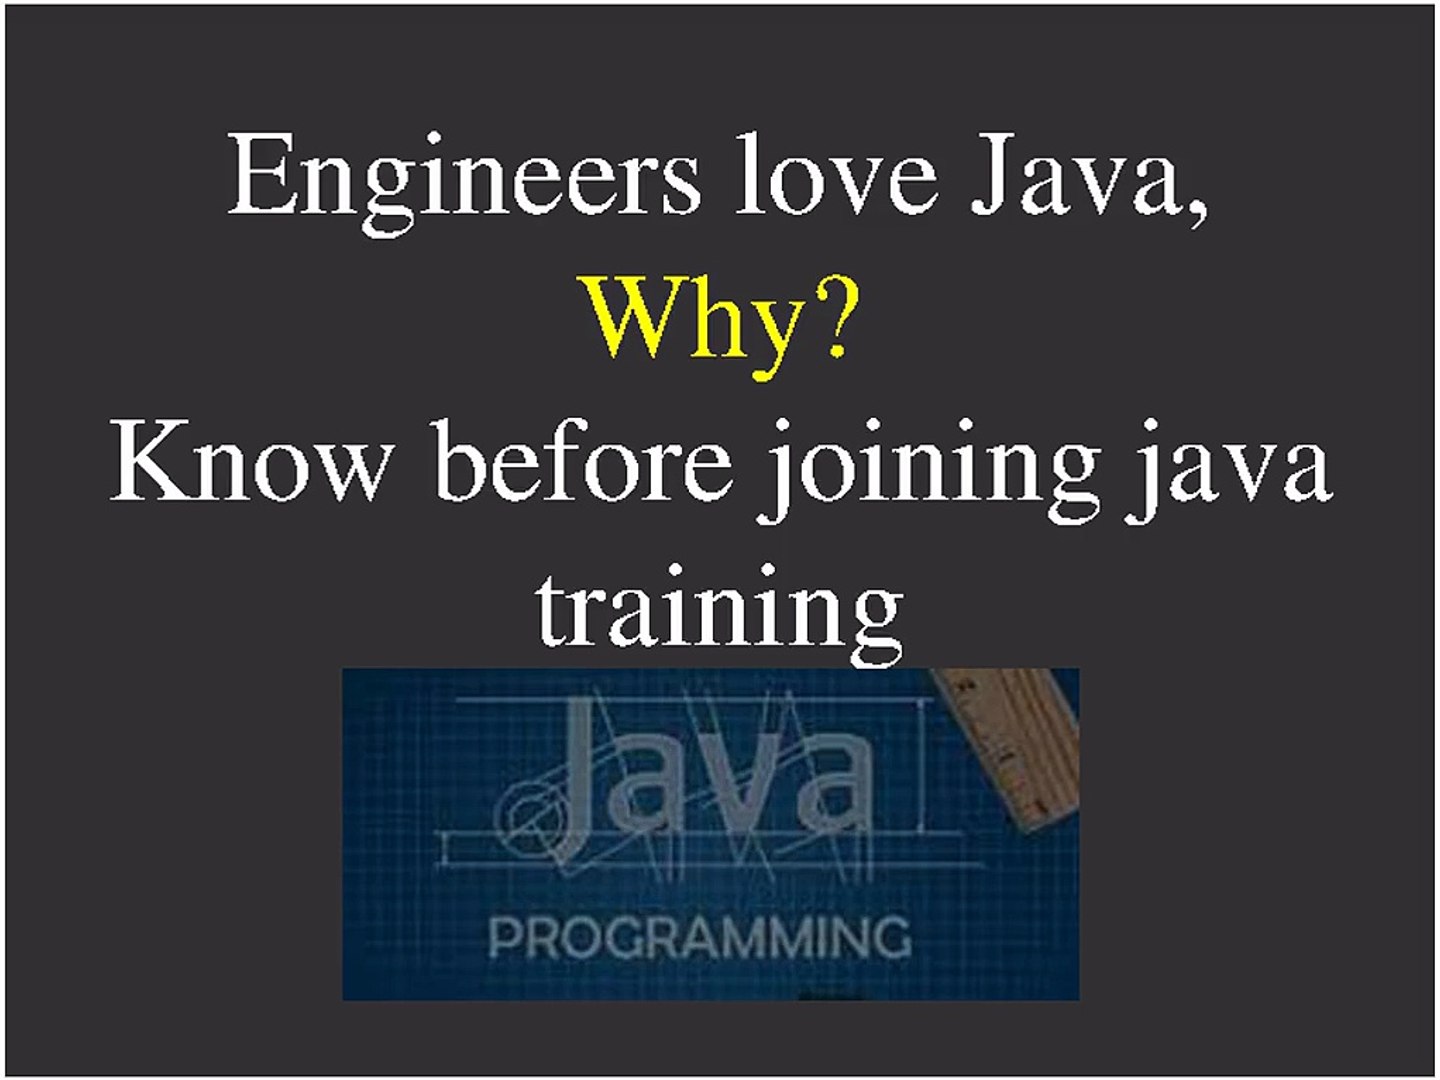 Engineers love Java, Why? Know before joining java training